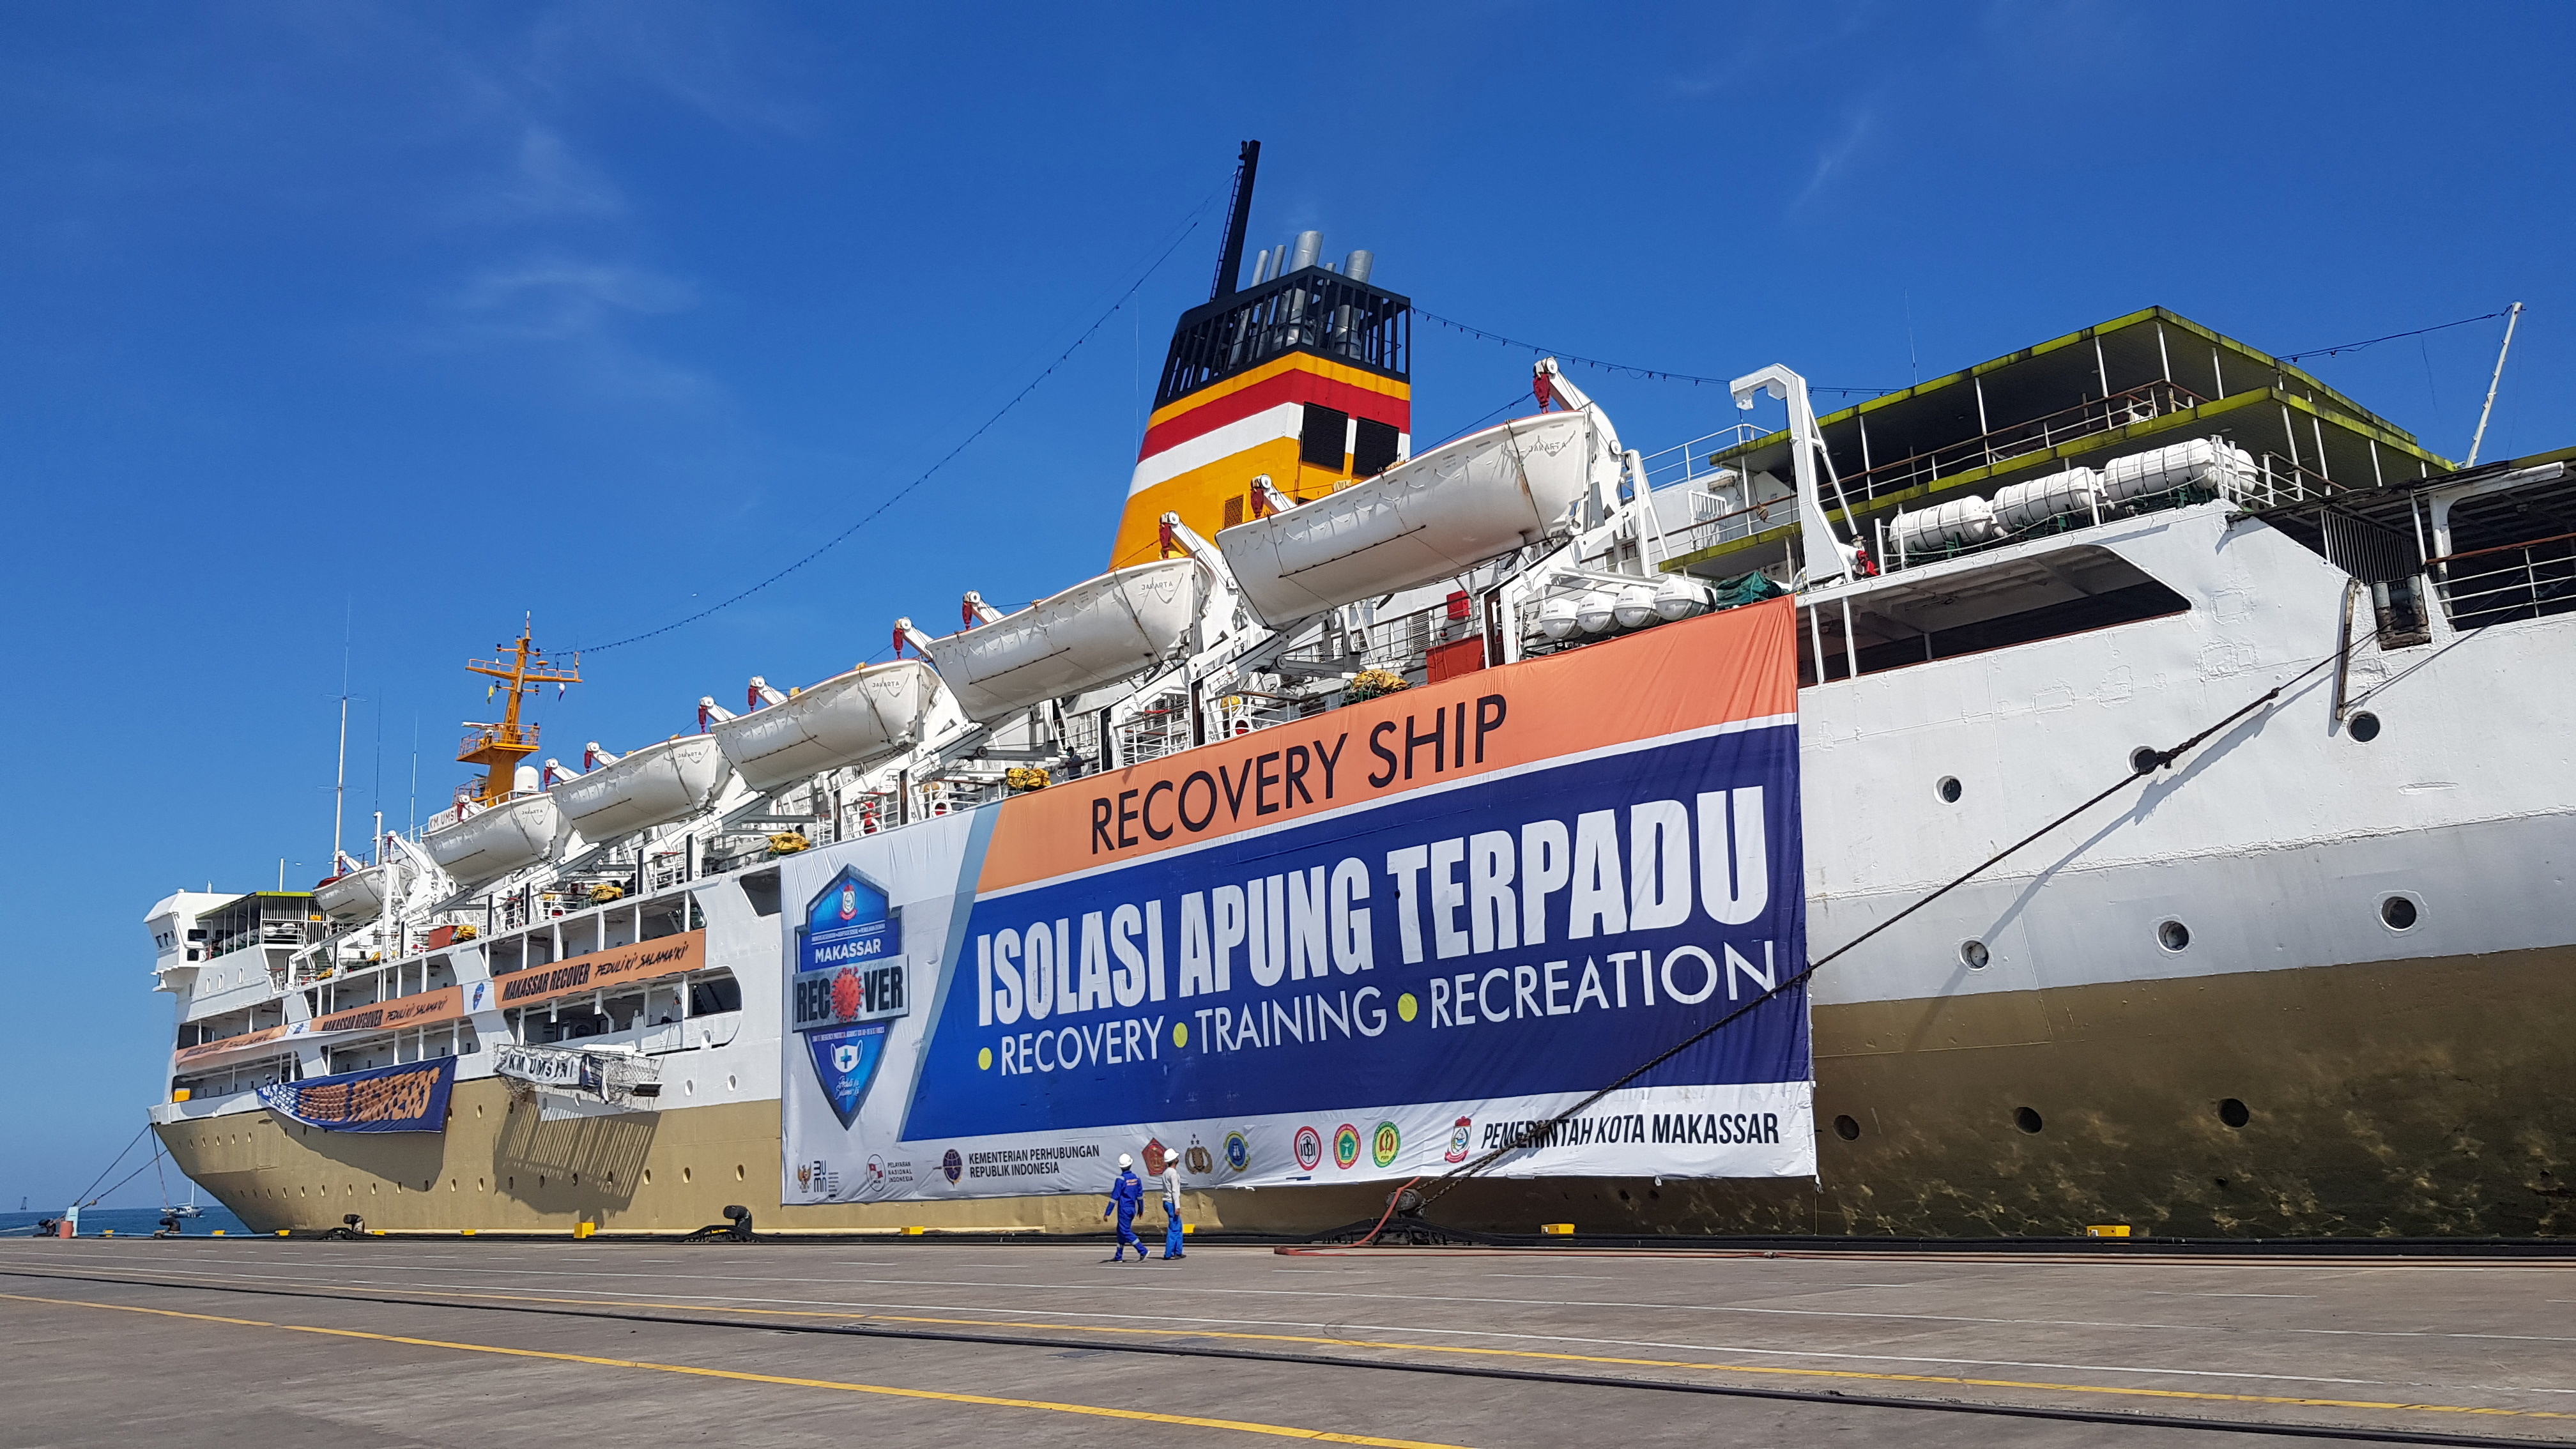 A passenger ship turned into an isolation centre for COVID-19 patients in Makassar